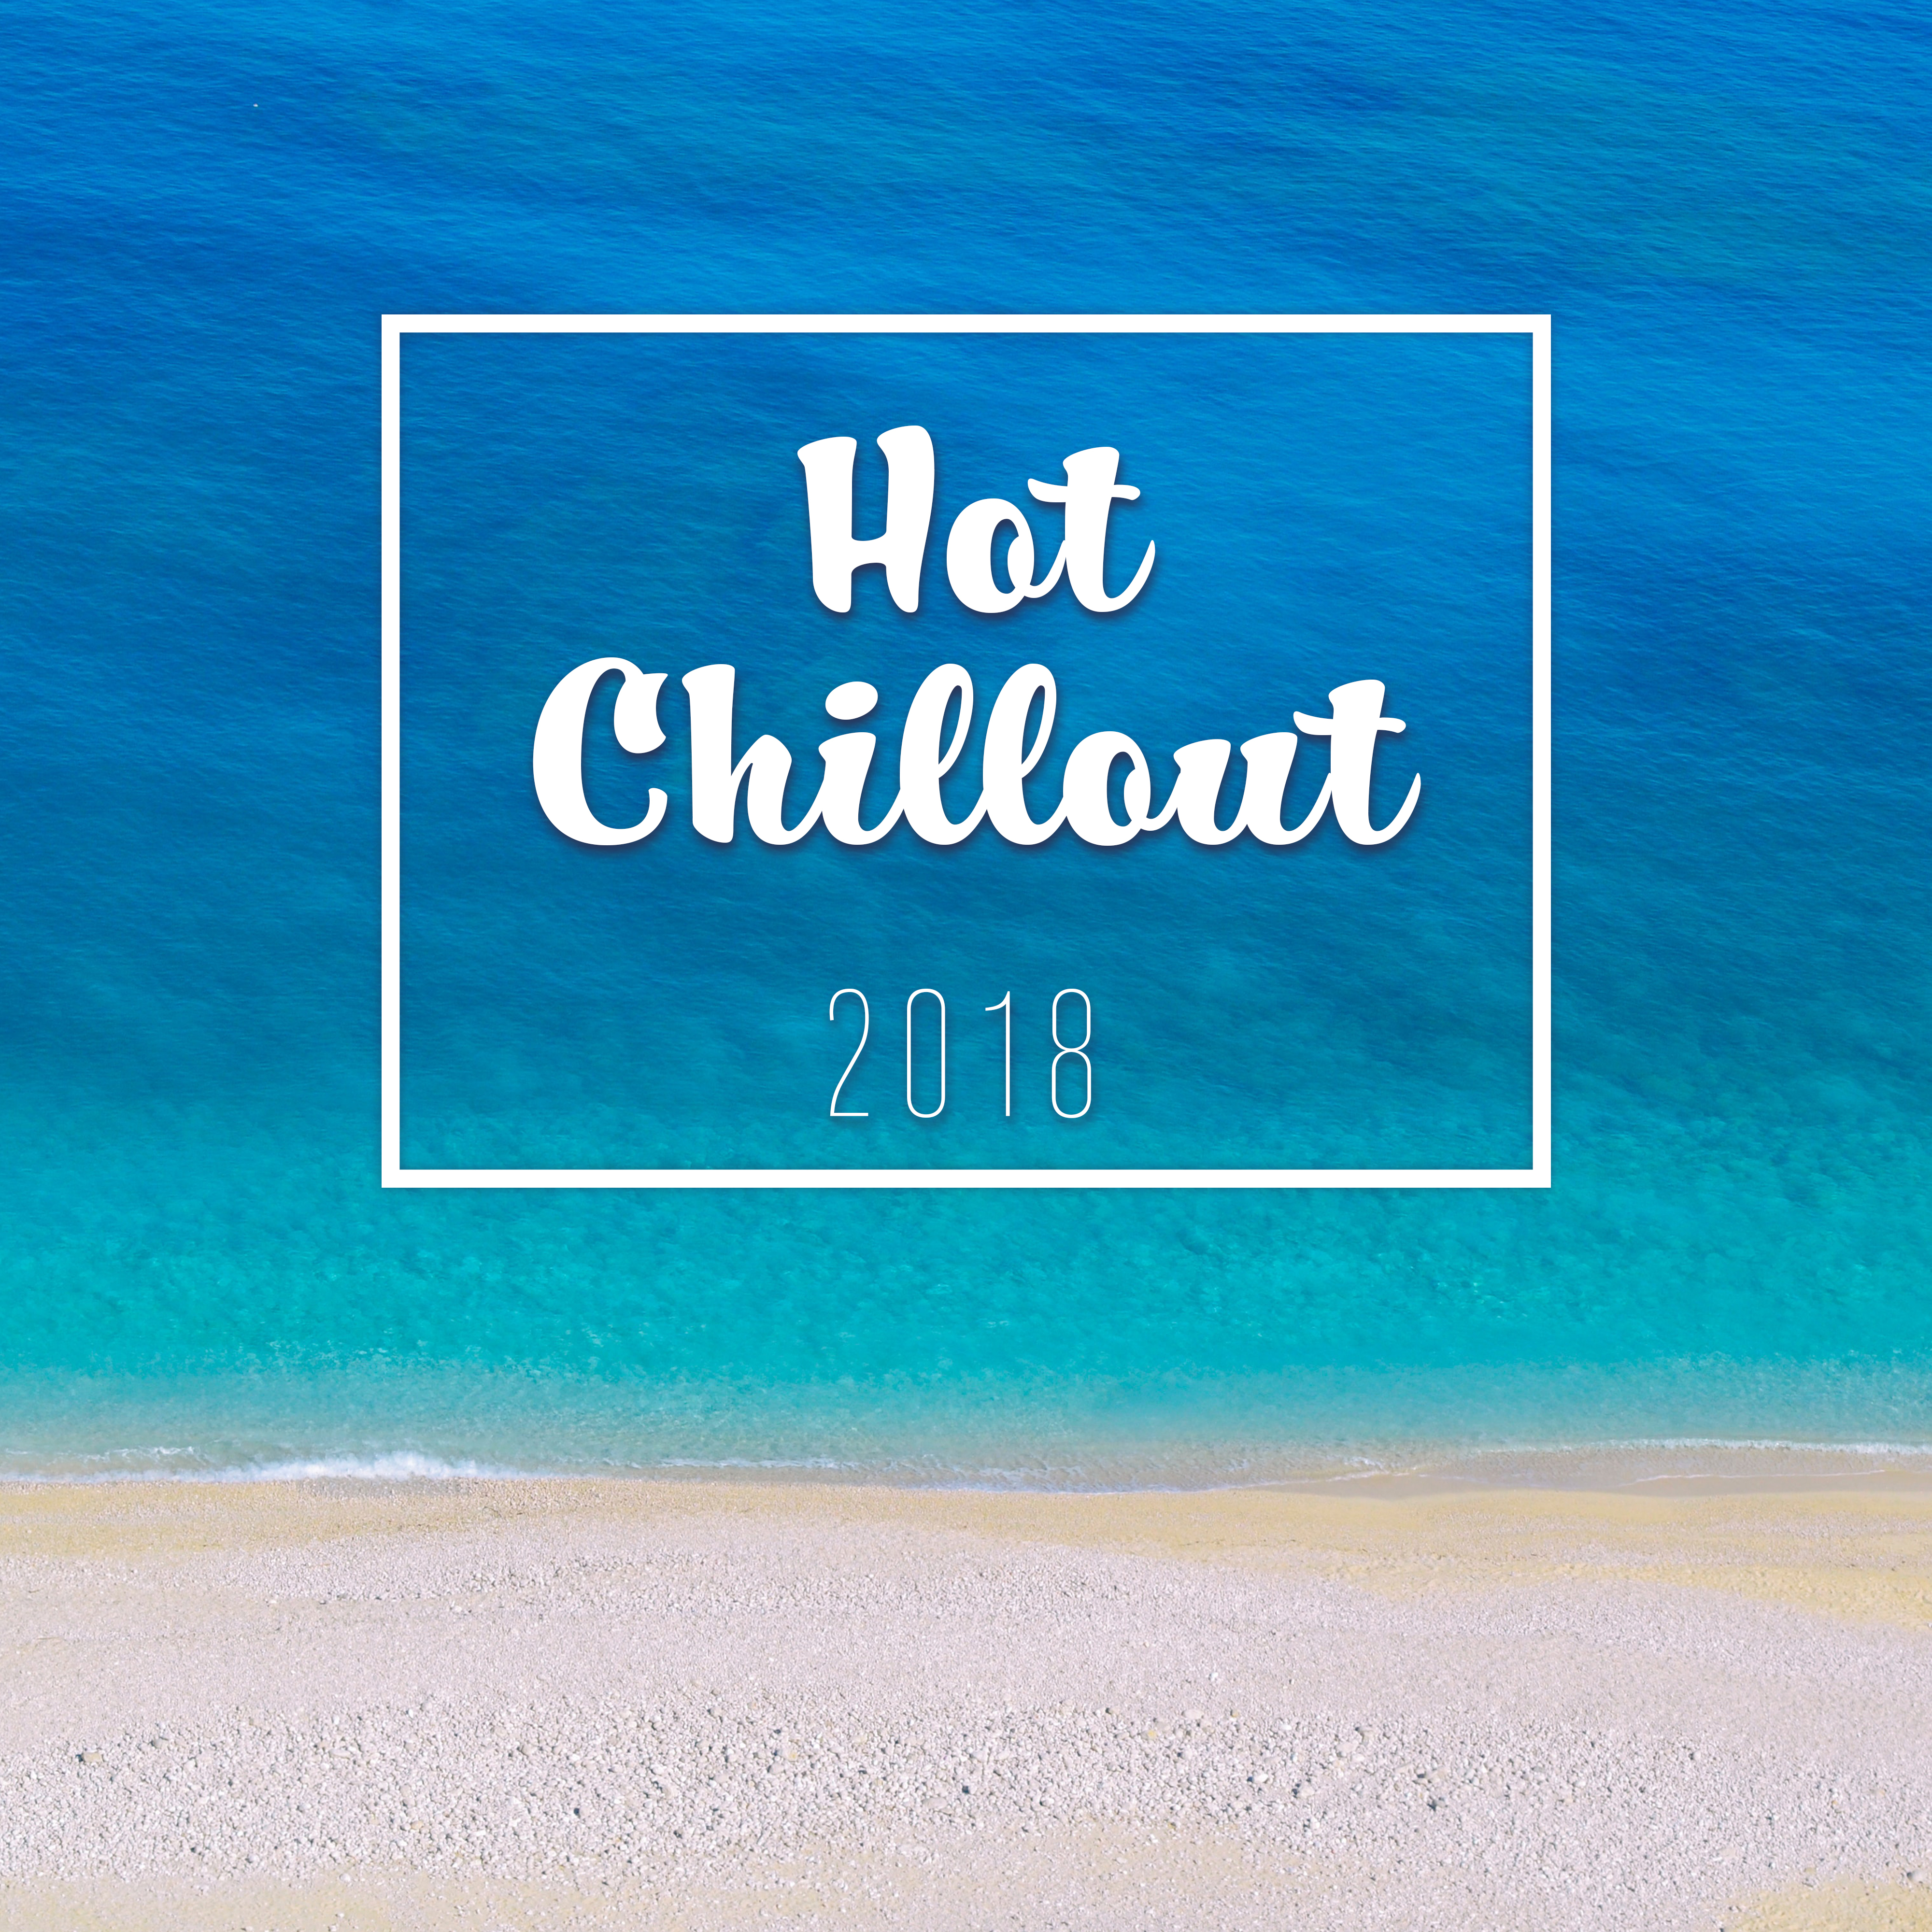 Hot Chillout 2018